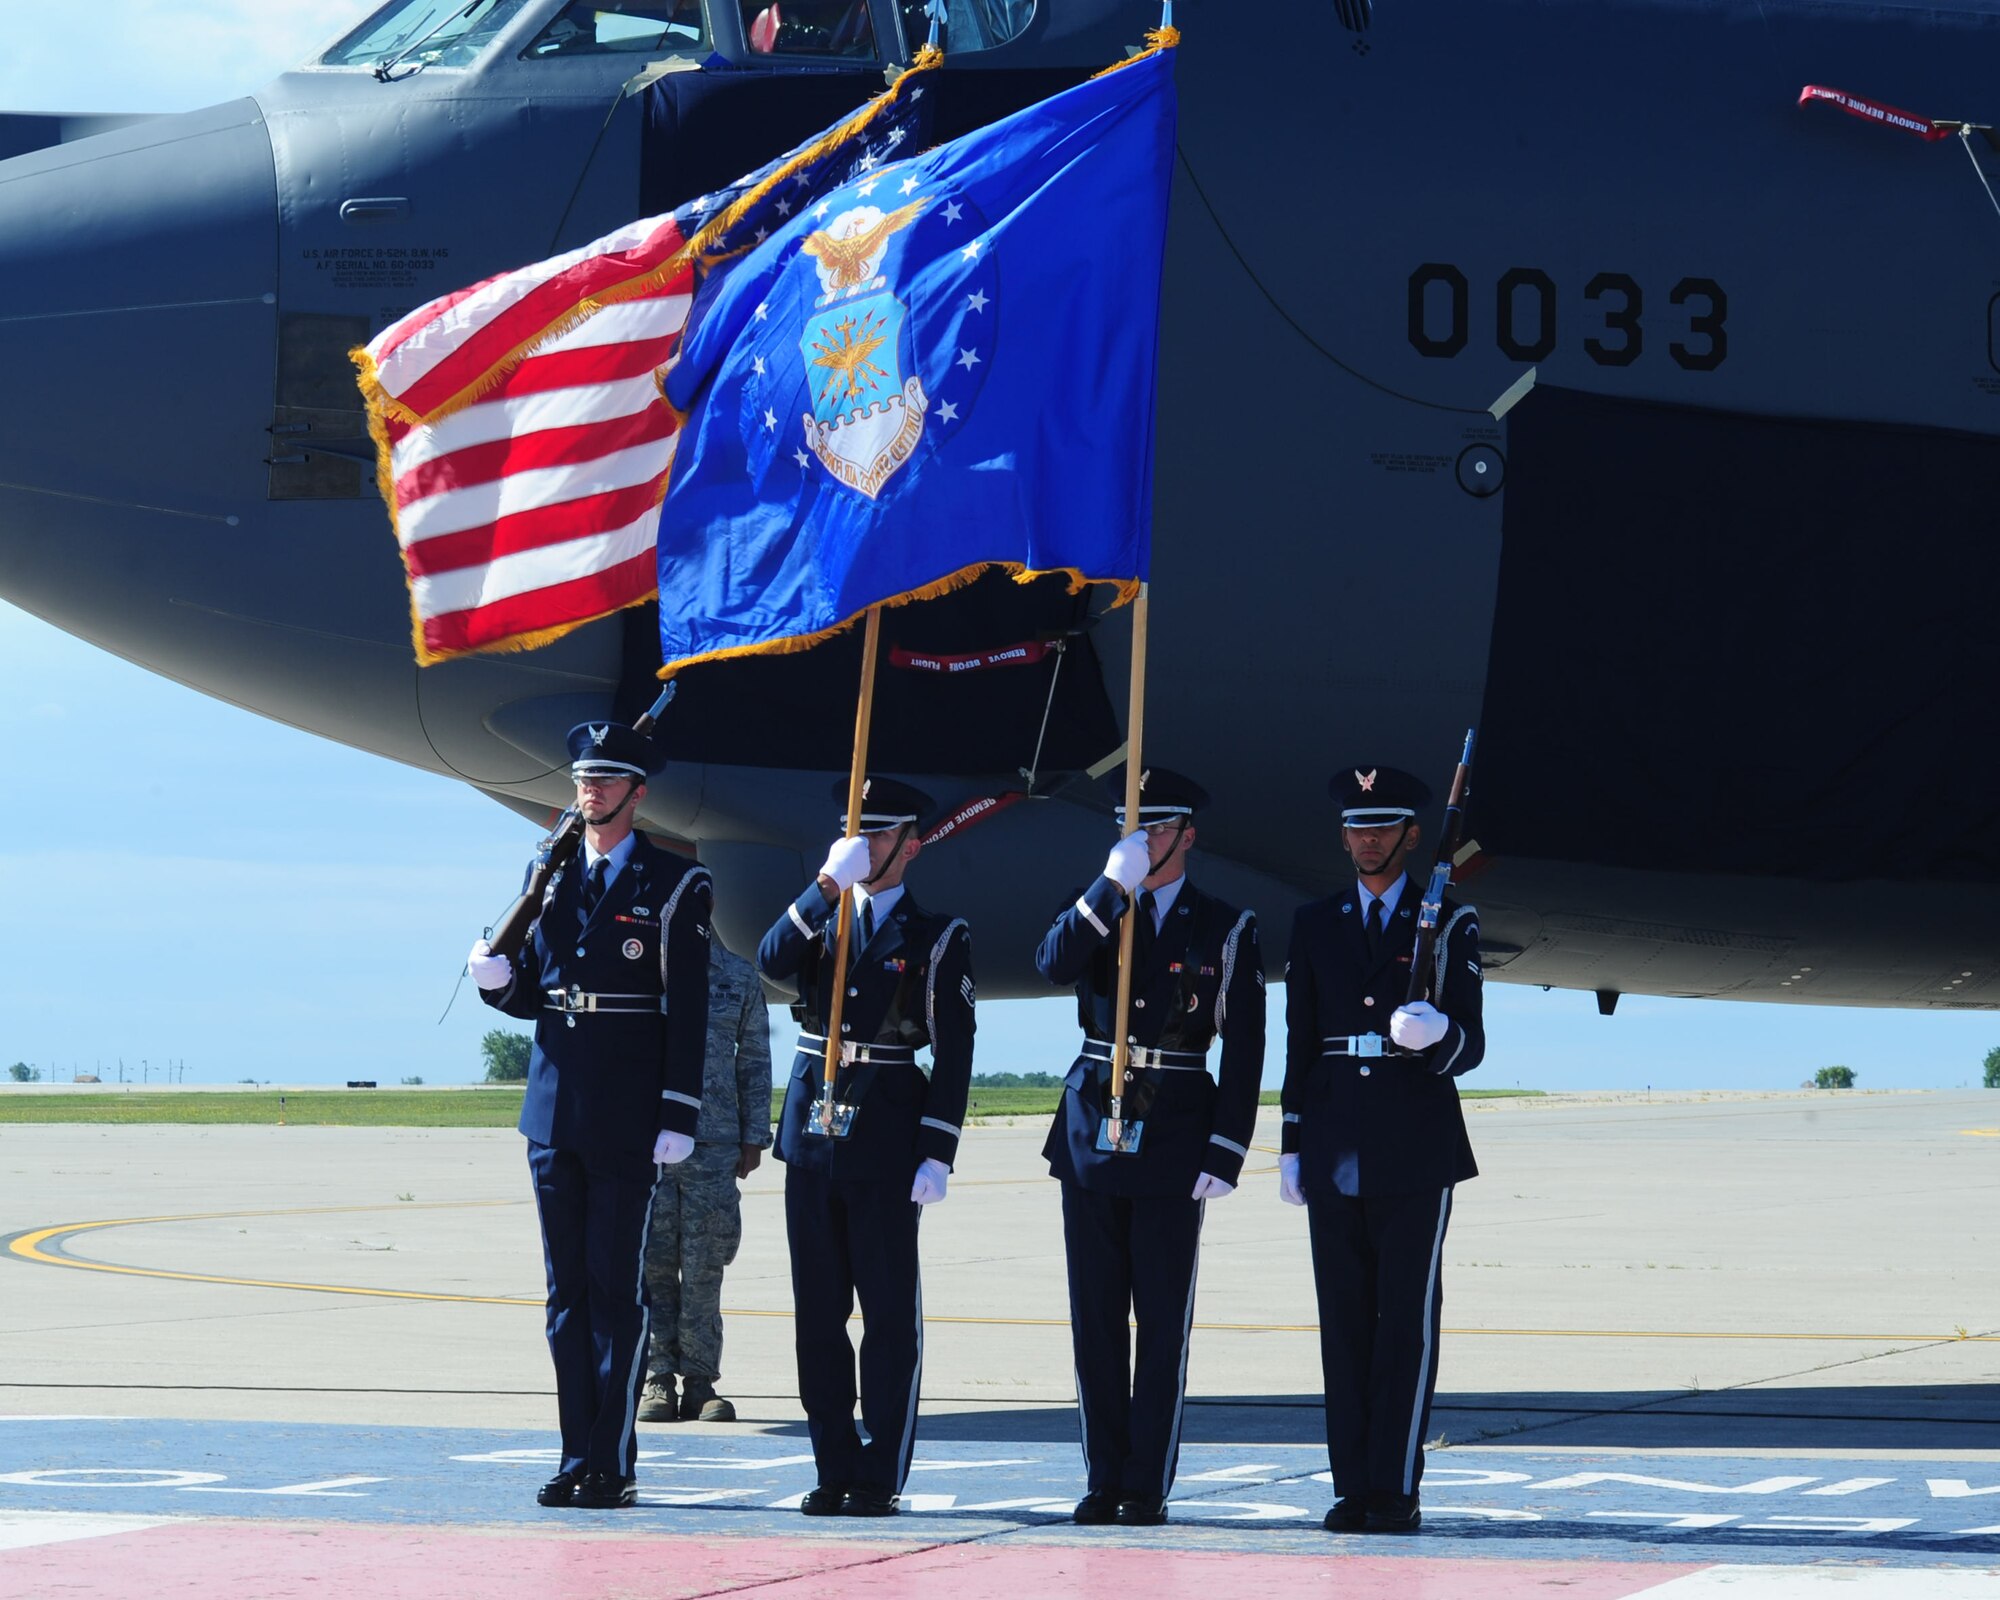 MINOT AIR FORCE BASE, N.D. -- Members of Minot Air Force Base Honor Guard present the colors during the 50th anniversary of the B-52H Stratofortess’s arrival to Minot here Aug. 19. The B-52, named the “Peace Persuader,” had nostalgic nose art painted on the airframe to commemorate the history of the aircraft. (U.S. Air Force photo/Senior Airman Michael J. Veloz)